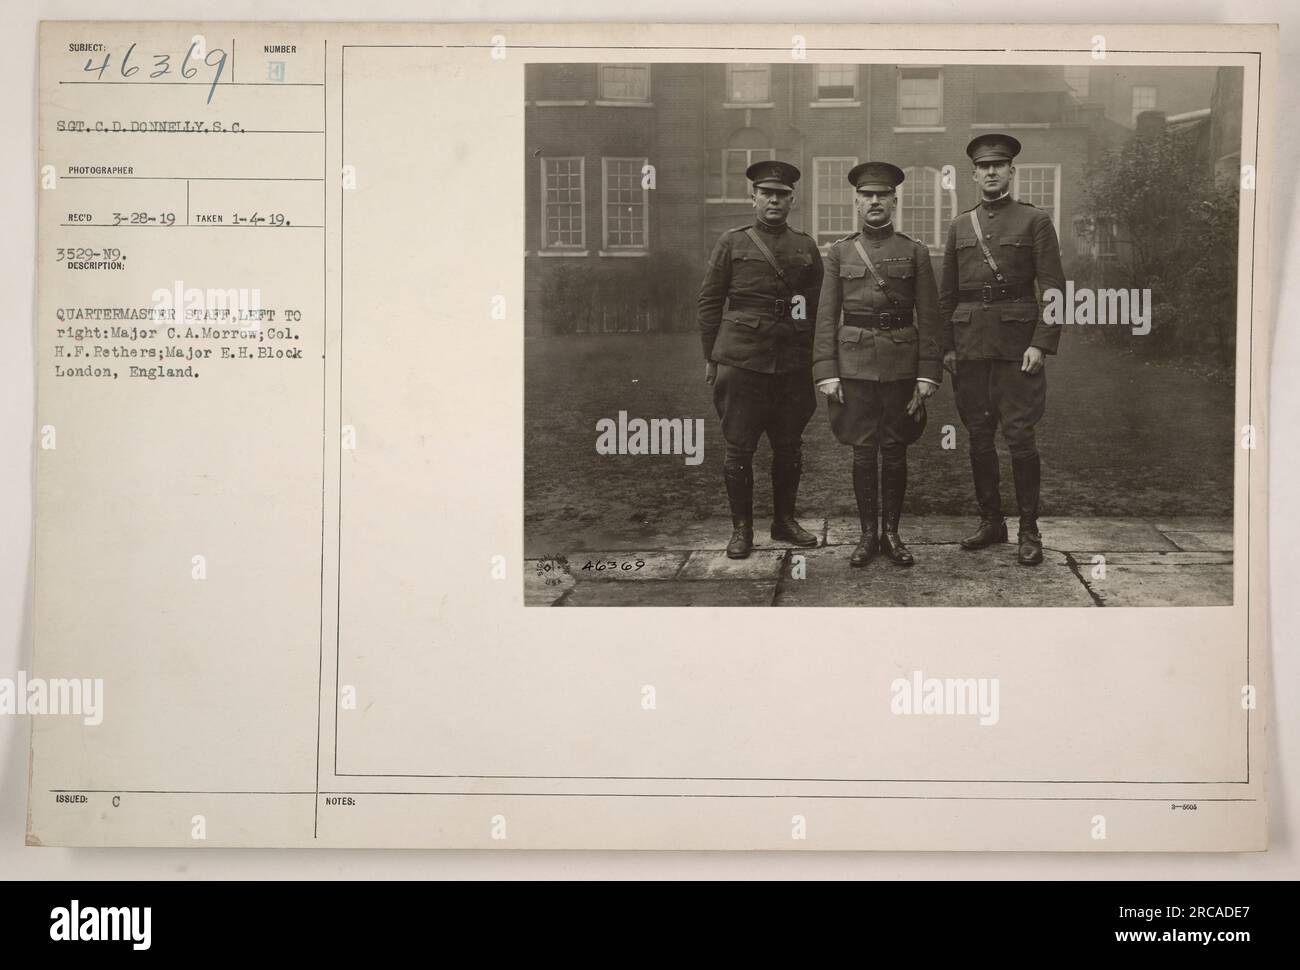 Quartermaster staff, left to right: Major C.A. Morrow; Col. H.F. Rethers; Major E.H. Block. London, England. This photograph was taken by 463691 SGT.C.D. DONNELLY.S.C. on January 4, 1919. It is identified as number 3529-19 in the collection. The caption on the back of the photo states the names of the staff members shown and their respective ranks. Stock Photo